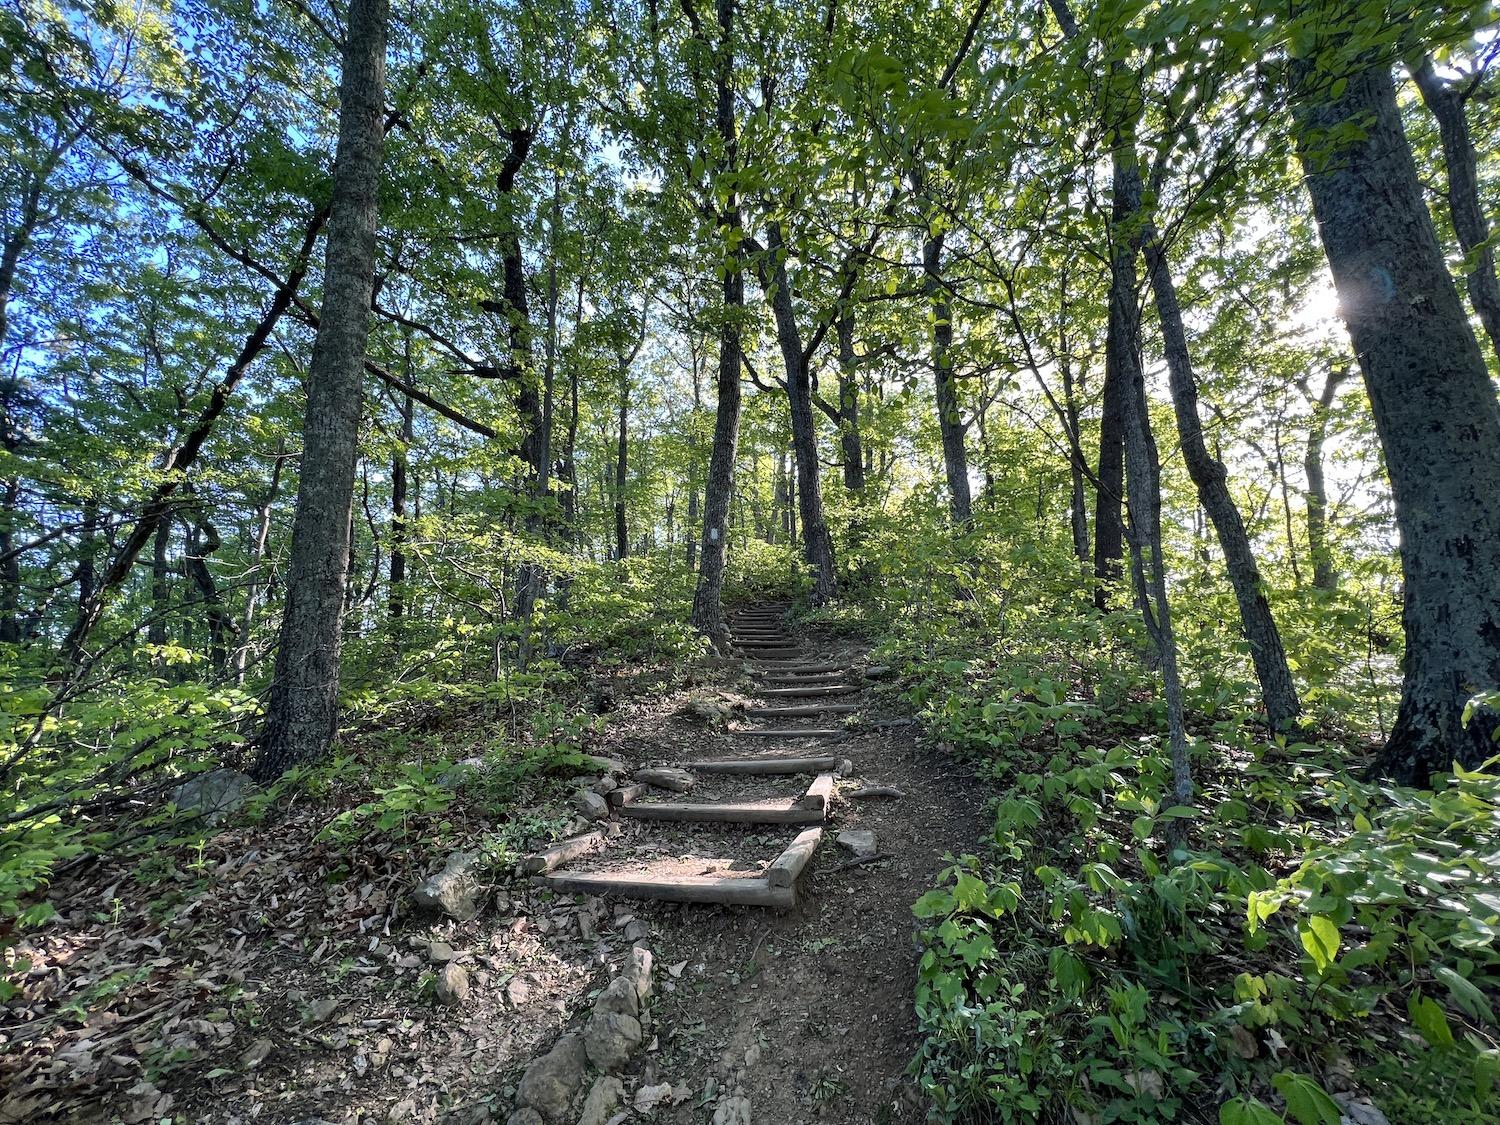 The McAfee Knob trail starts out with a short, steep climb in an instantly beautiful forest.